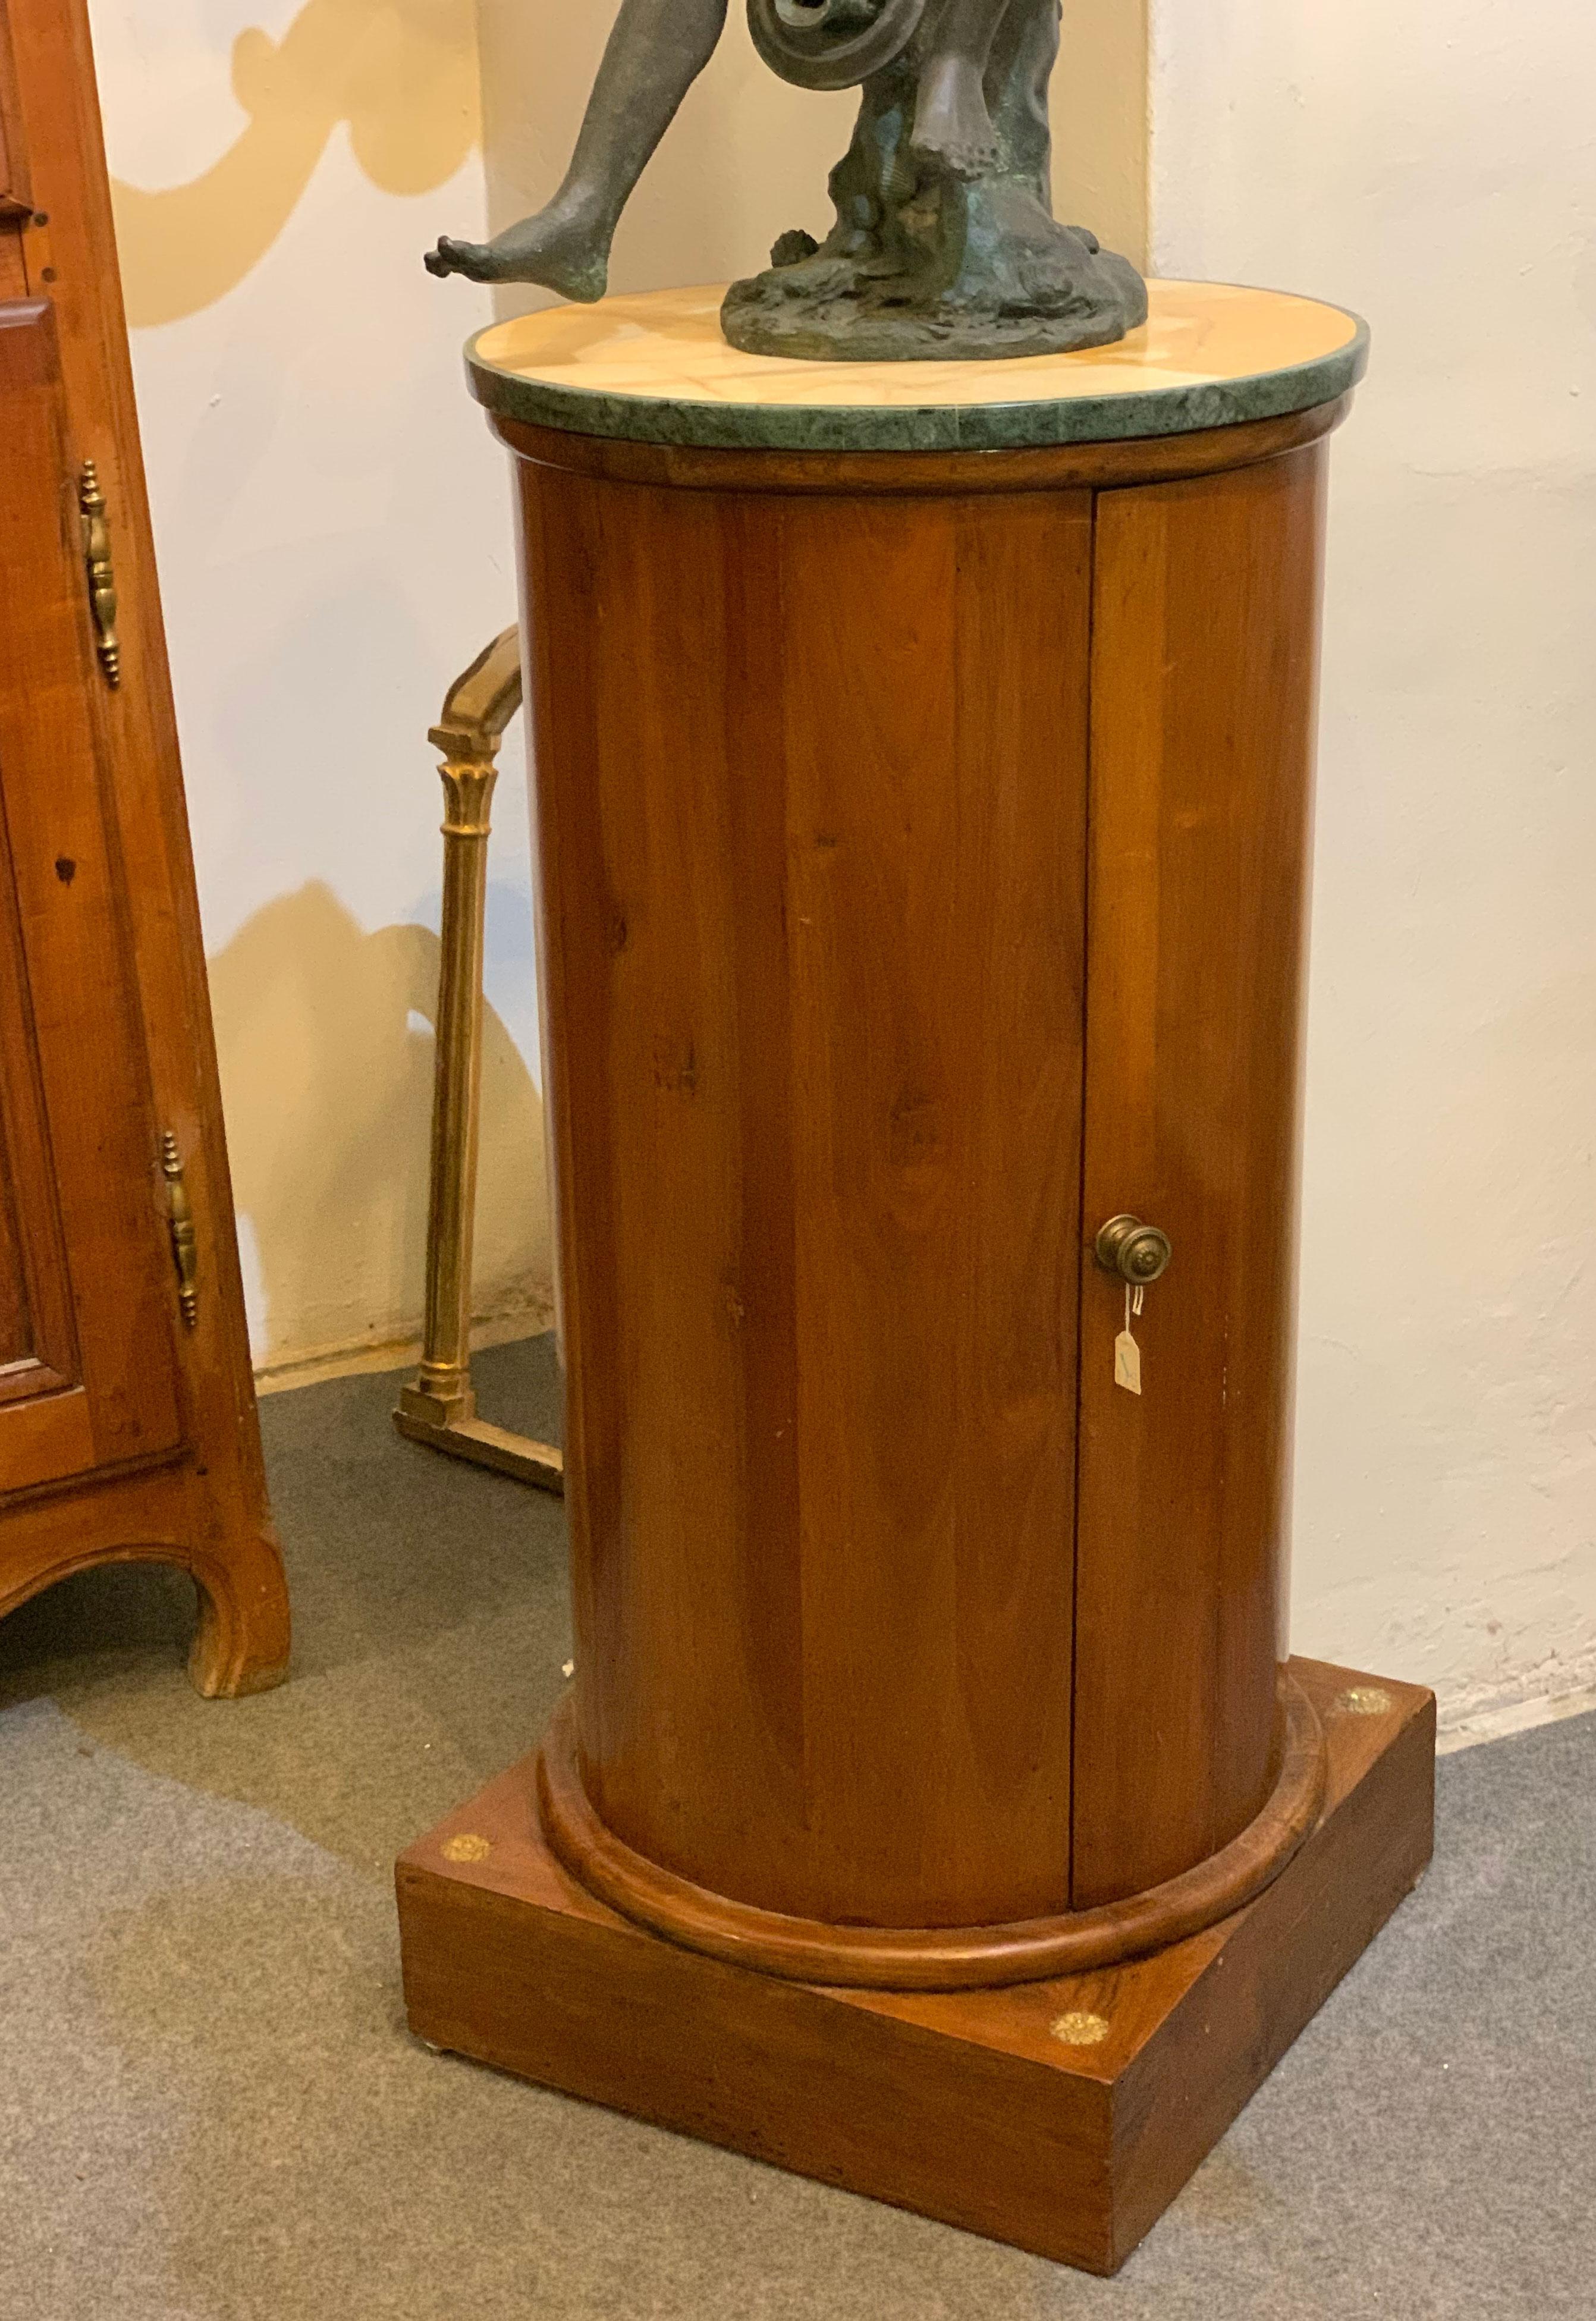 Elegant circular column on plinth base entirely veneered in walnut, top in yellow Siena marble with profiles in green Prato marble.
It acts as a support for an object and as a container thanks to the opening door. The simplicity of the neoclassical